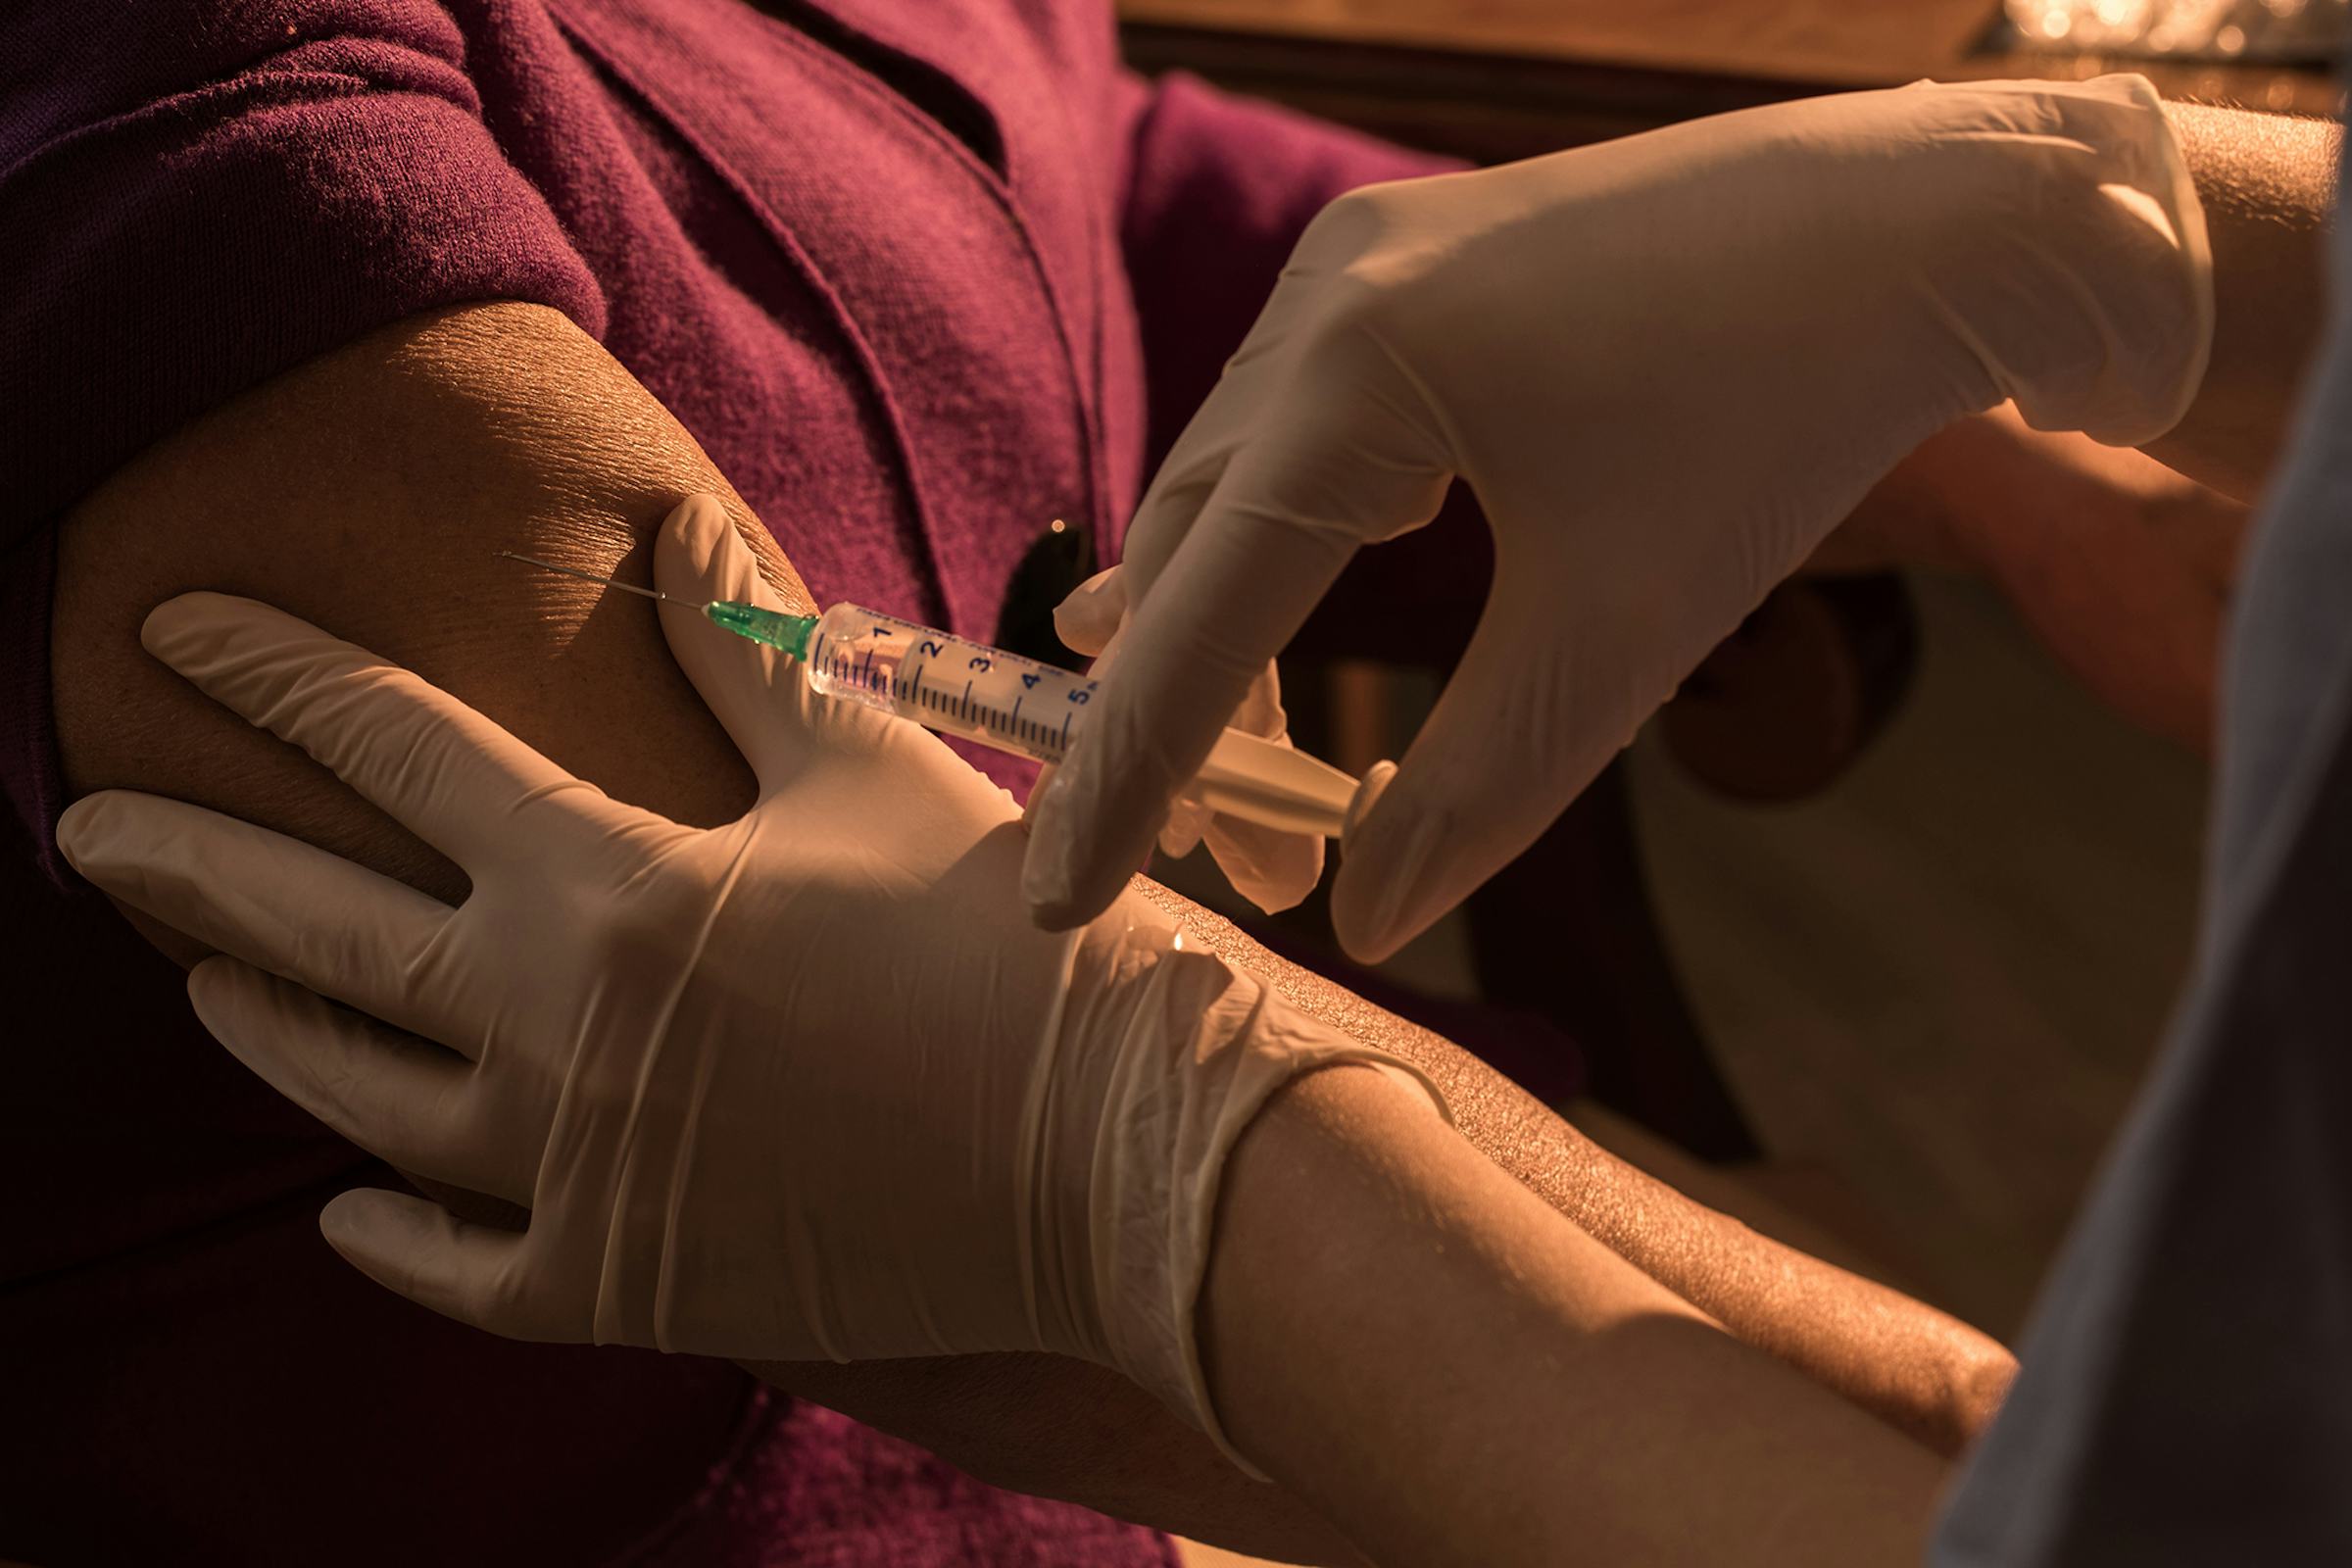 A patient receives a vaccination in the arm